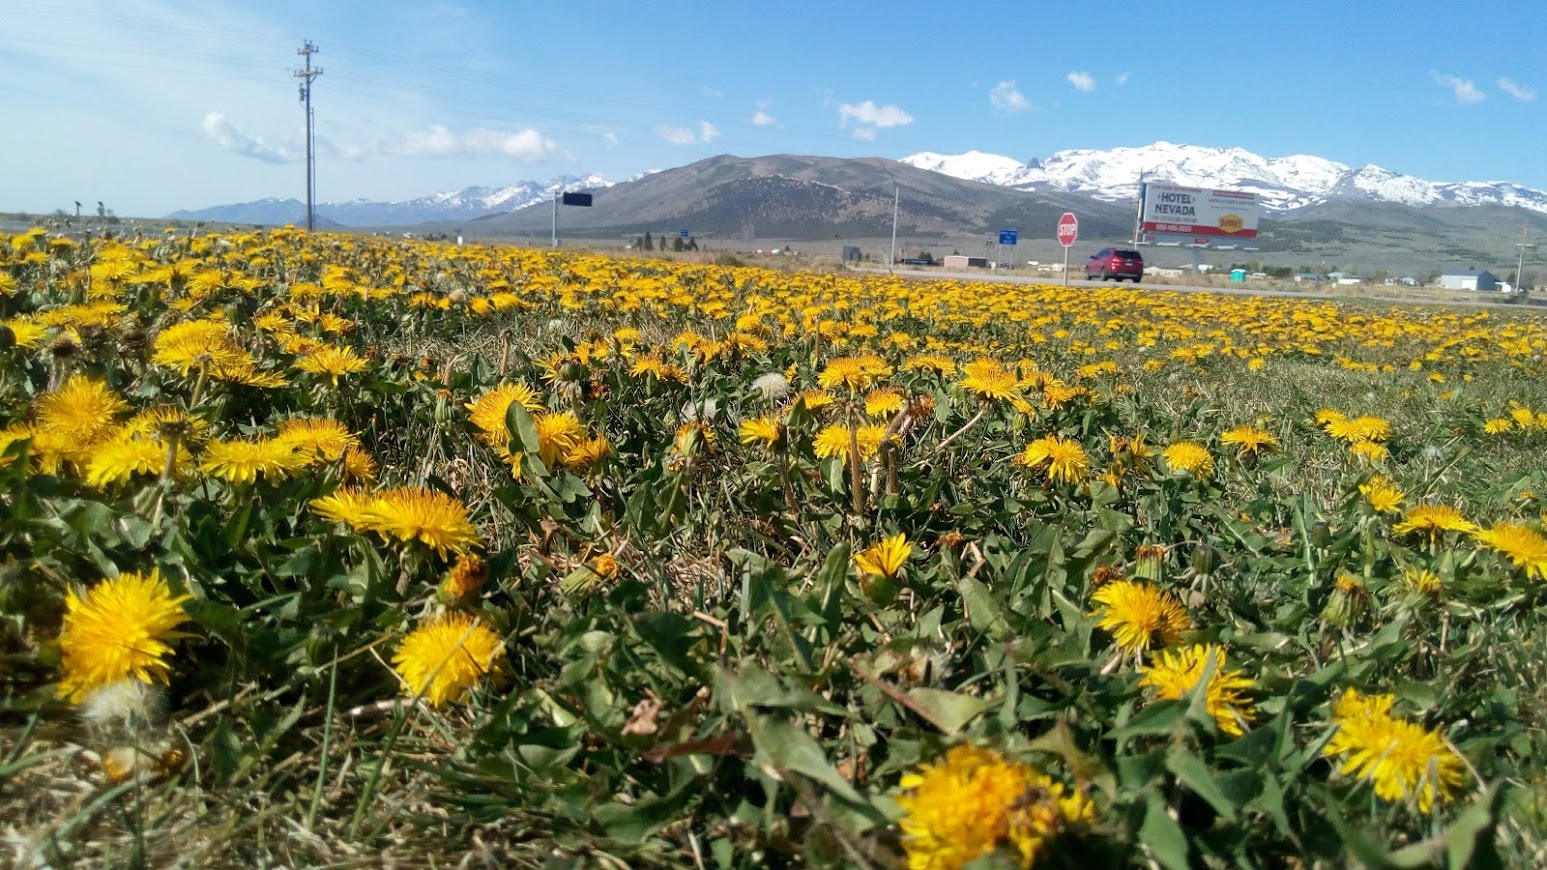 Dandelions in close up with a mountain in the distance.